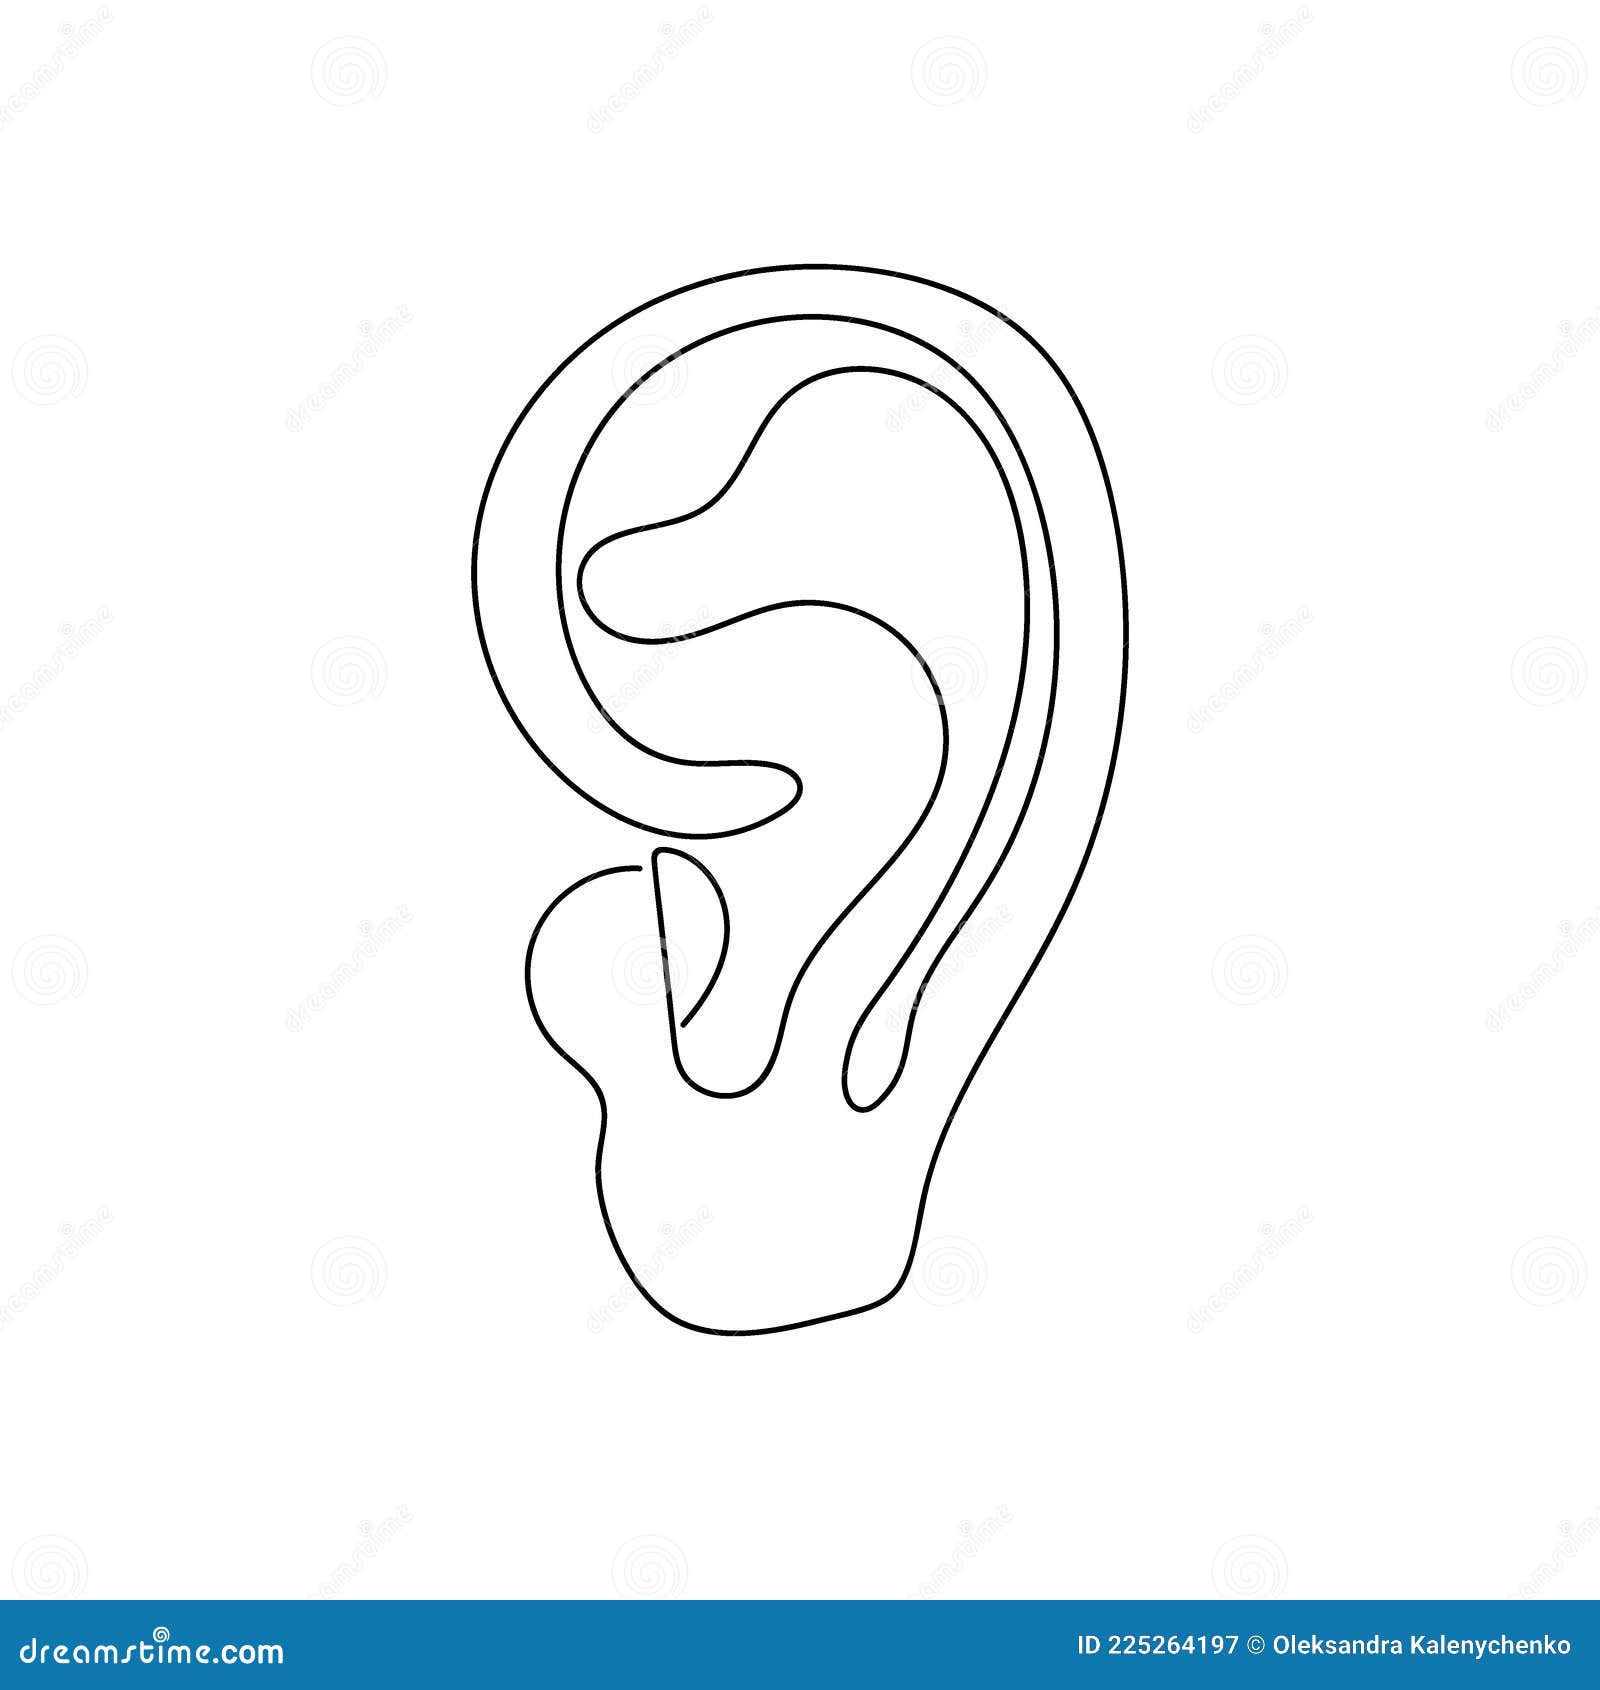 human ear one line art. continuous line drawing of human, organs, ear, hearing organ, auricle.